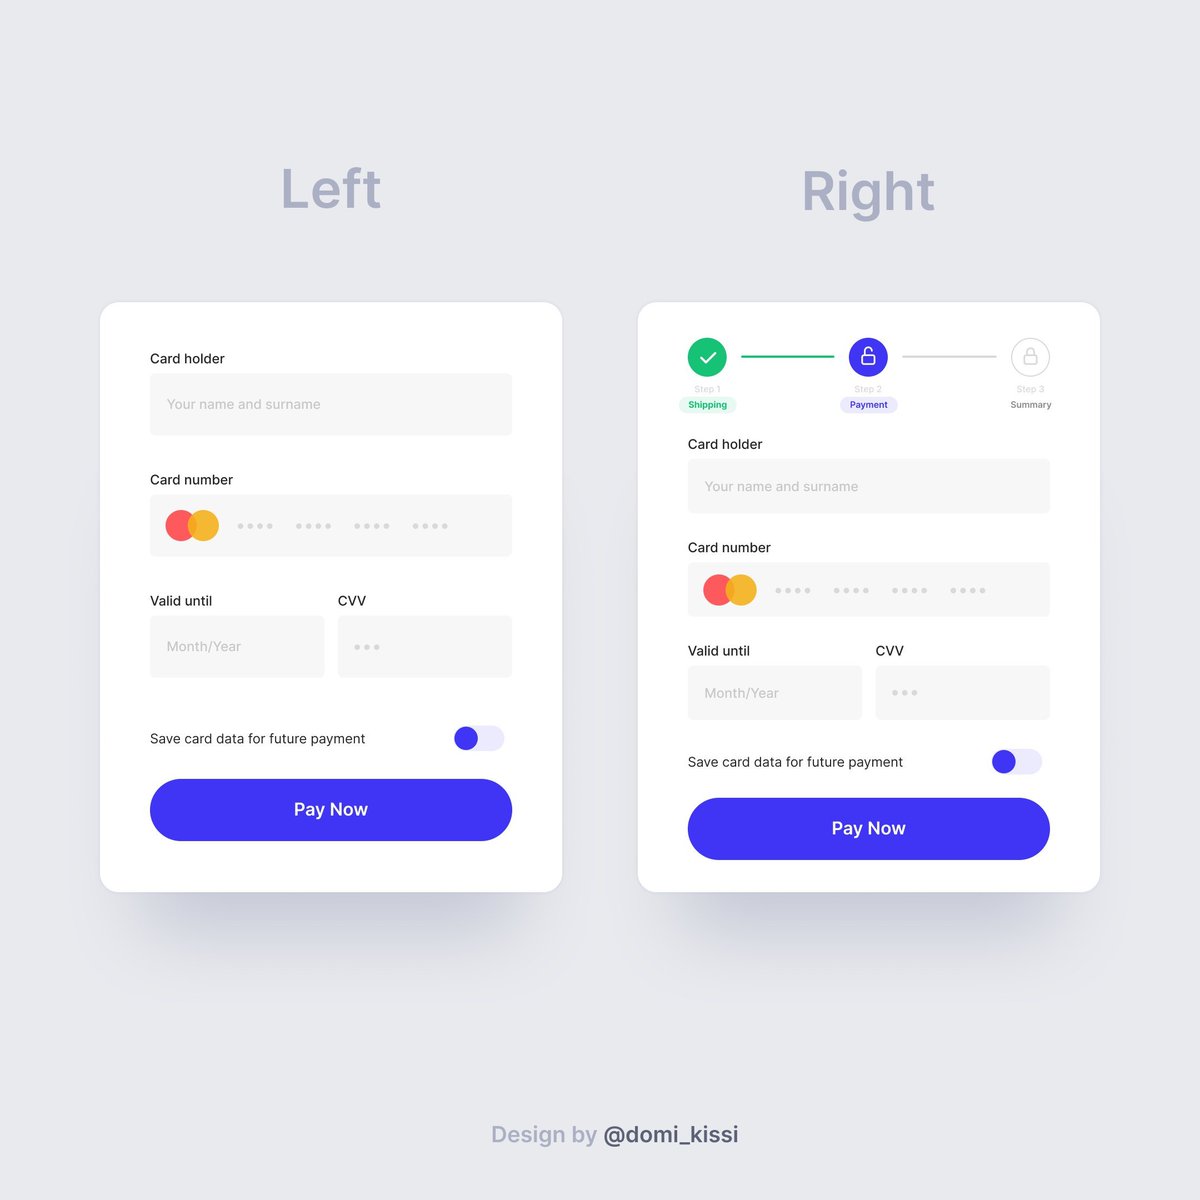 Which UI design grabs your eye?